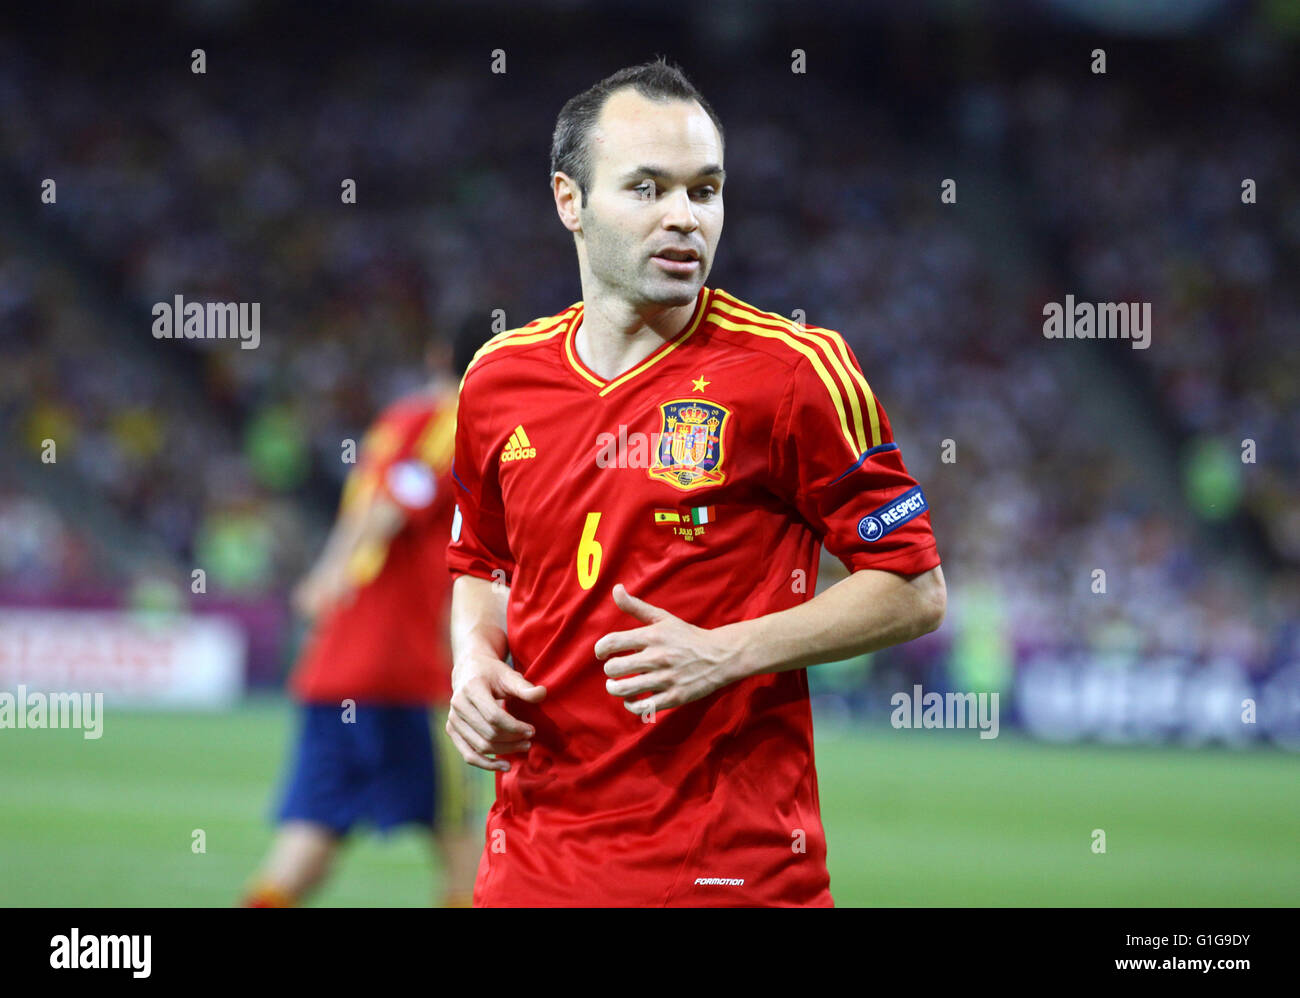 KYIV, UKRAINE - JULY 1, 2012: Portrait of Andres Iniesta of Spain during UEFA EURO 2012 Final game against Italy at Olympic stadium in Kyiv, Ukraine Stock Photo